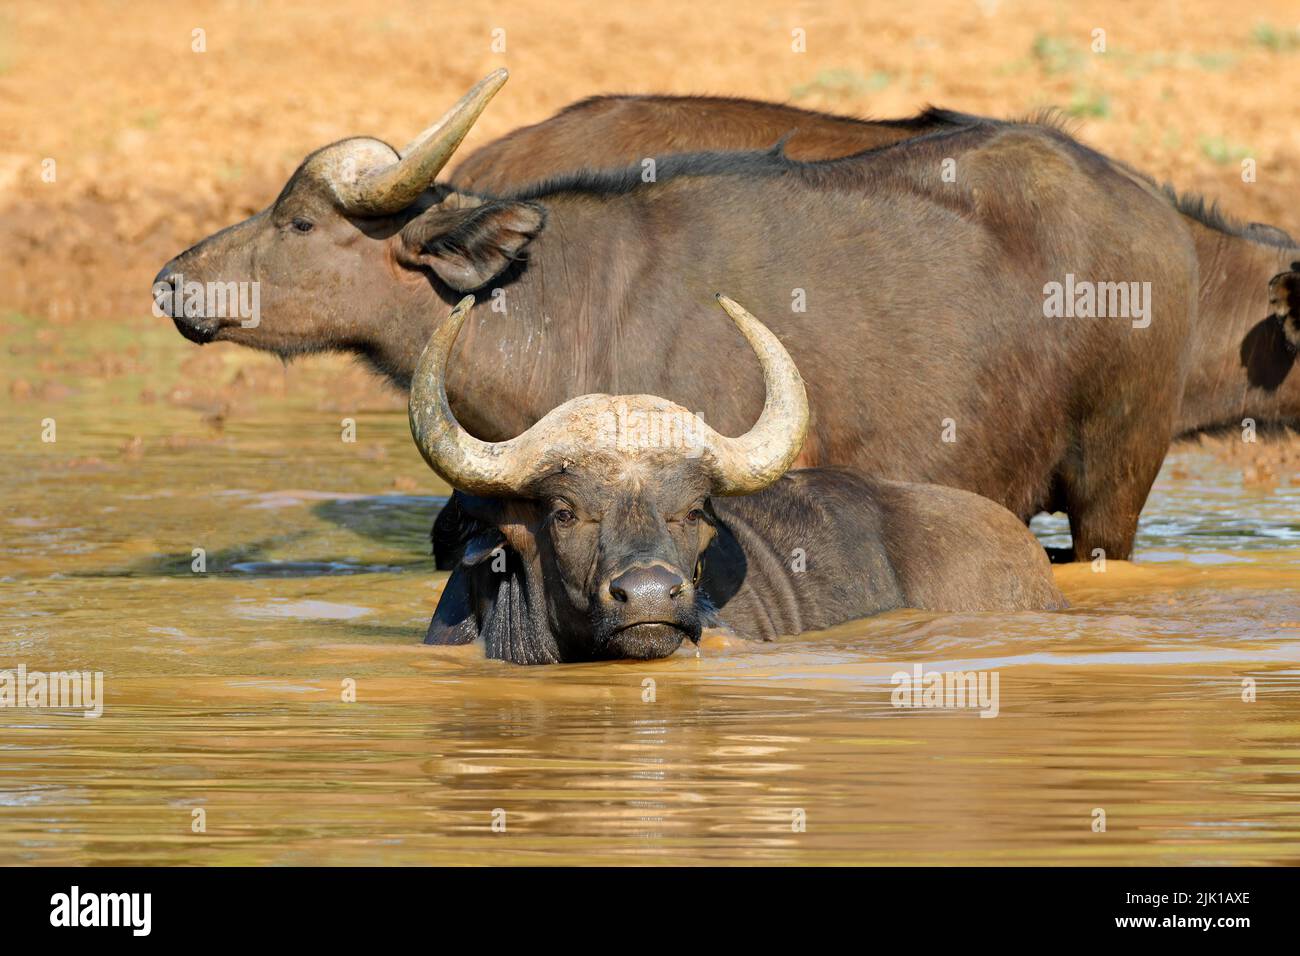 African buffaloes (Syncerus caffer) in wading in water, Mokala National Park, South Africa Stock Photo